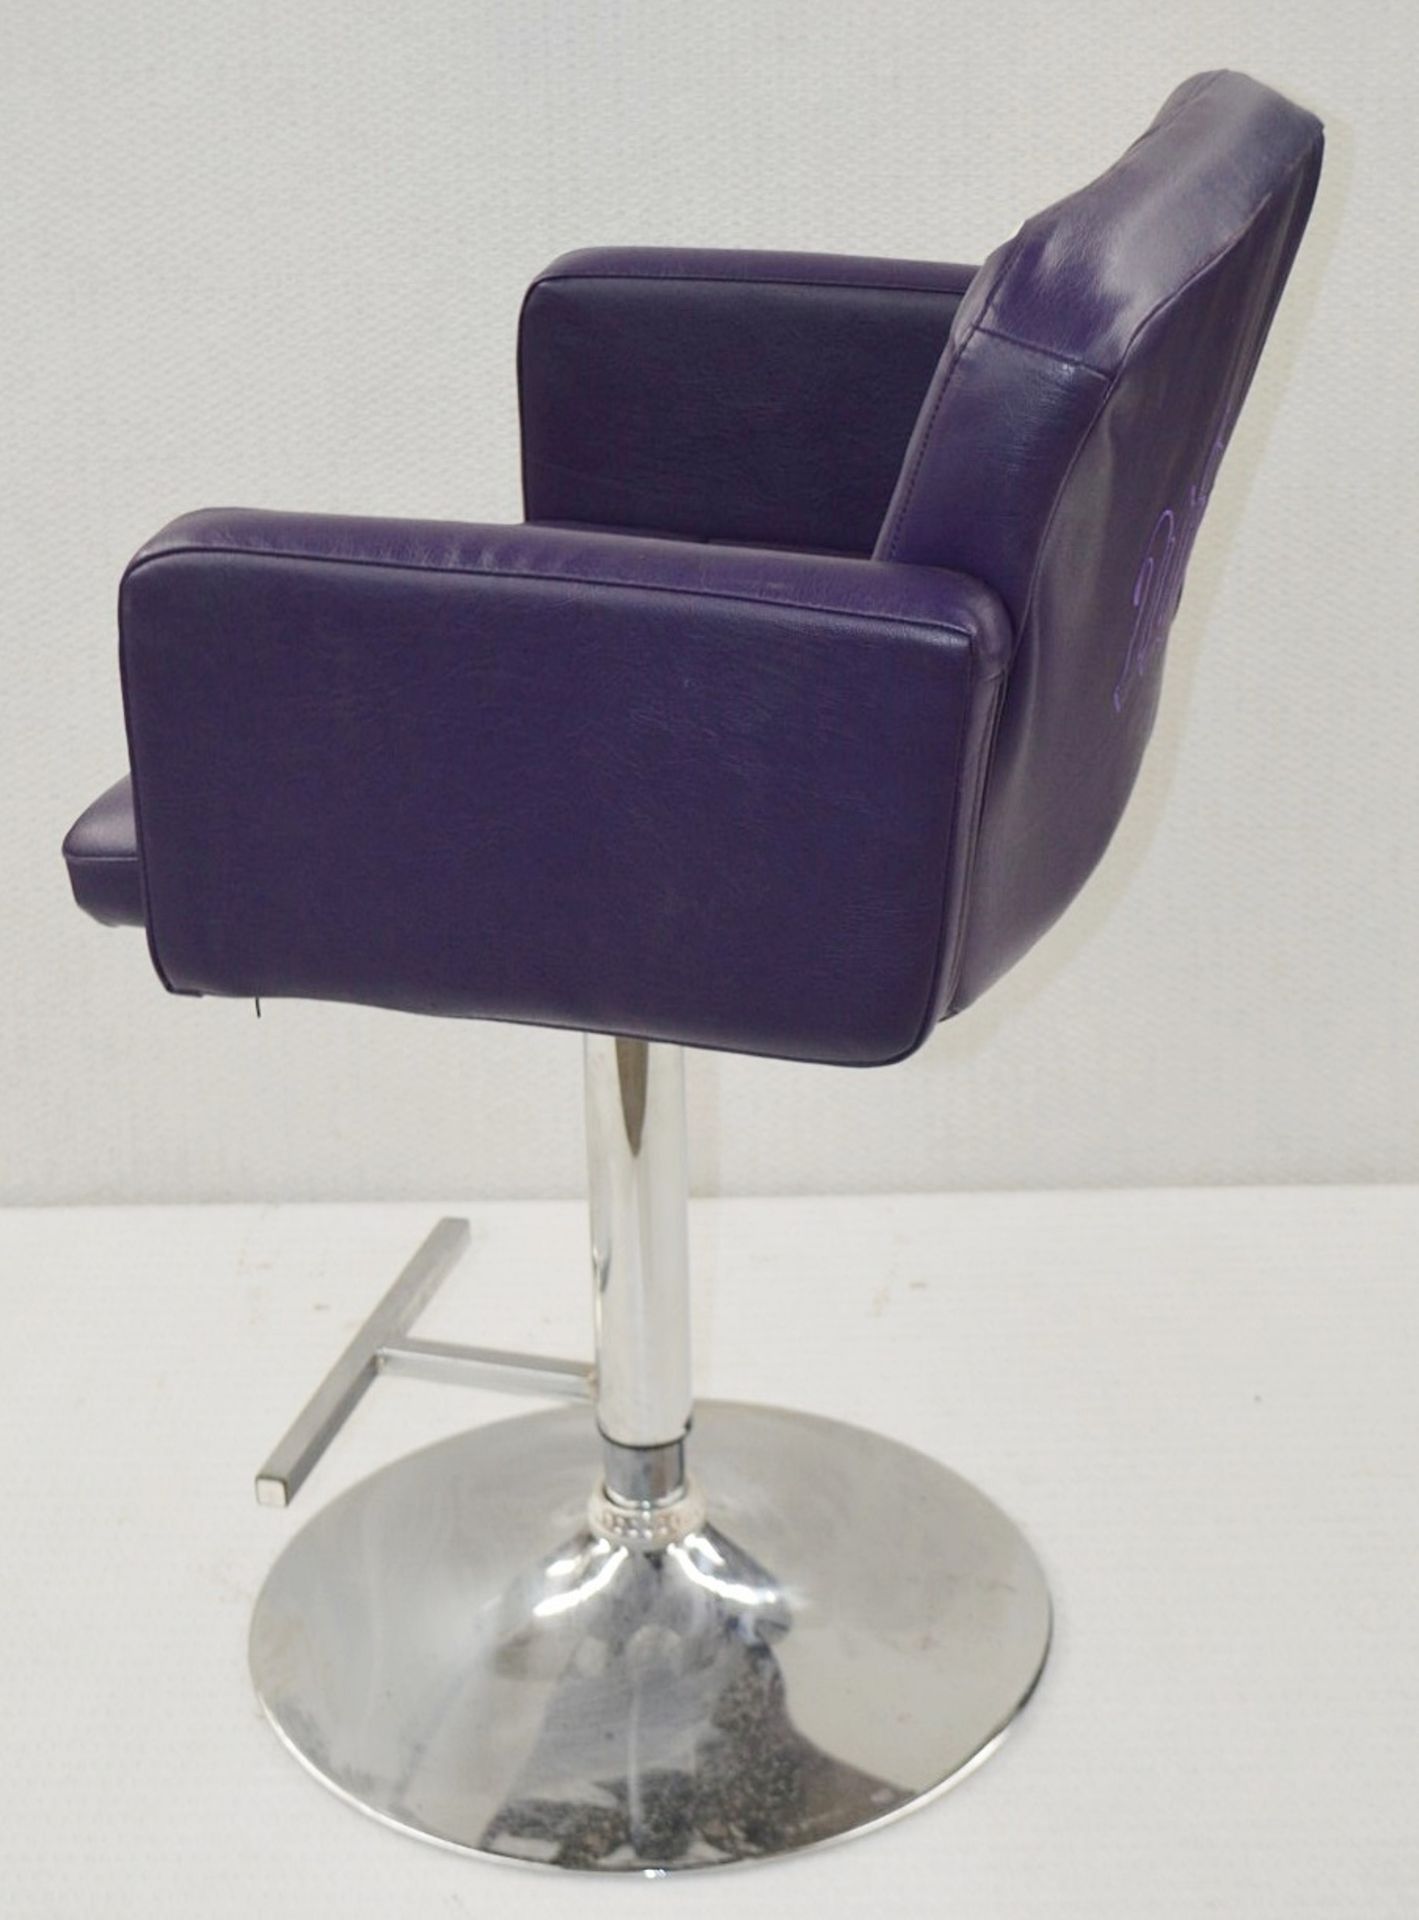 1 x URBAN DECAY Branded Gas-Lift Beauty Salon Swivel Chair With Foot Plate - Upholstered In Purple - Image 4 of 6